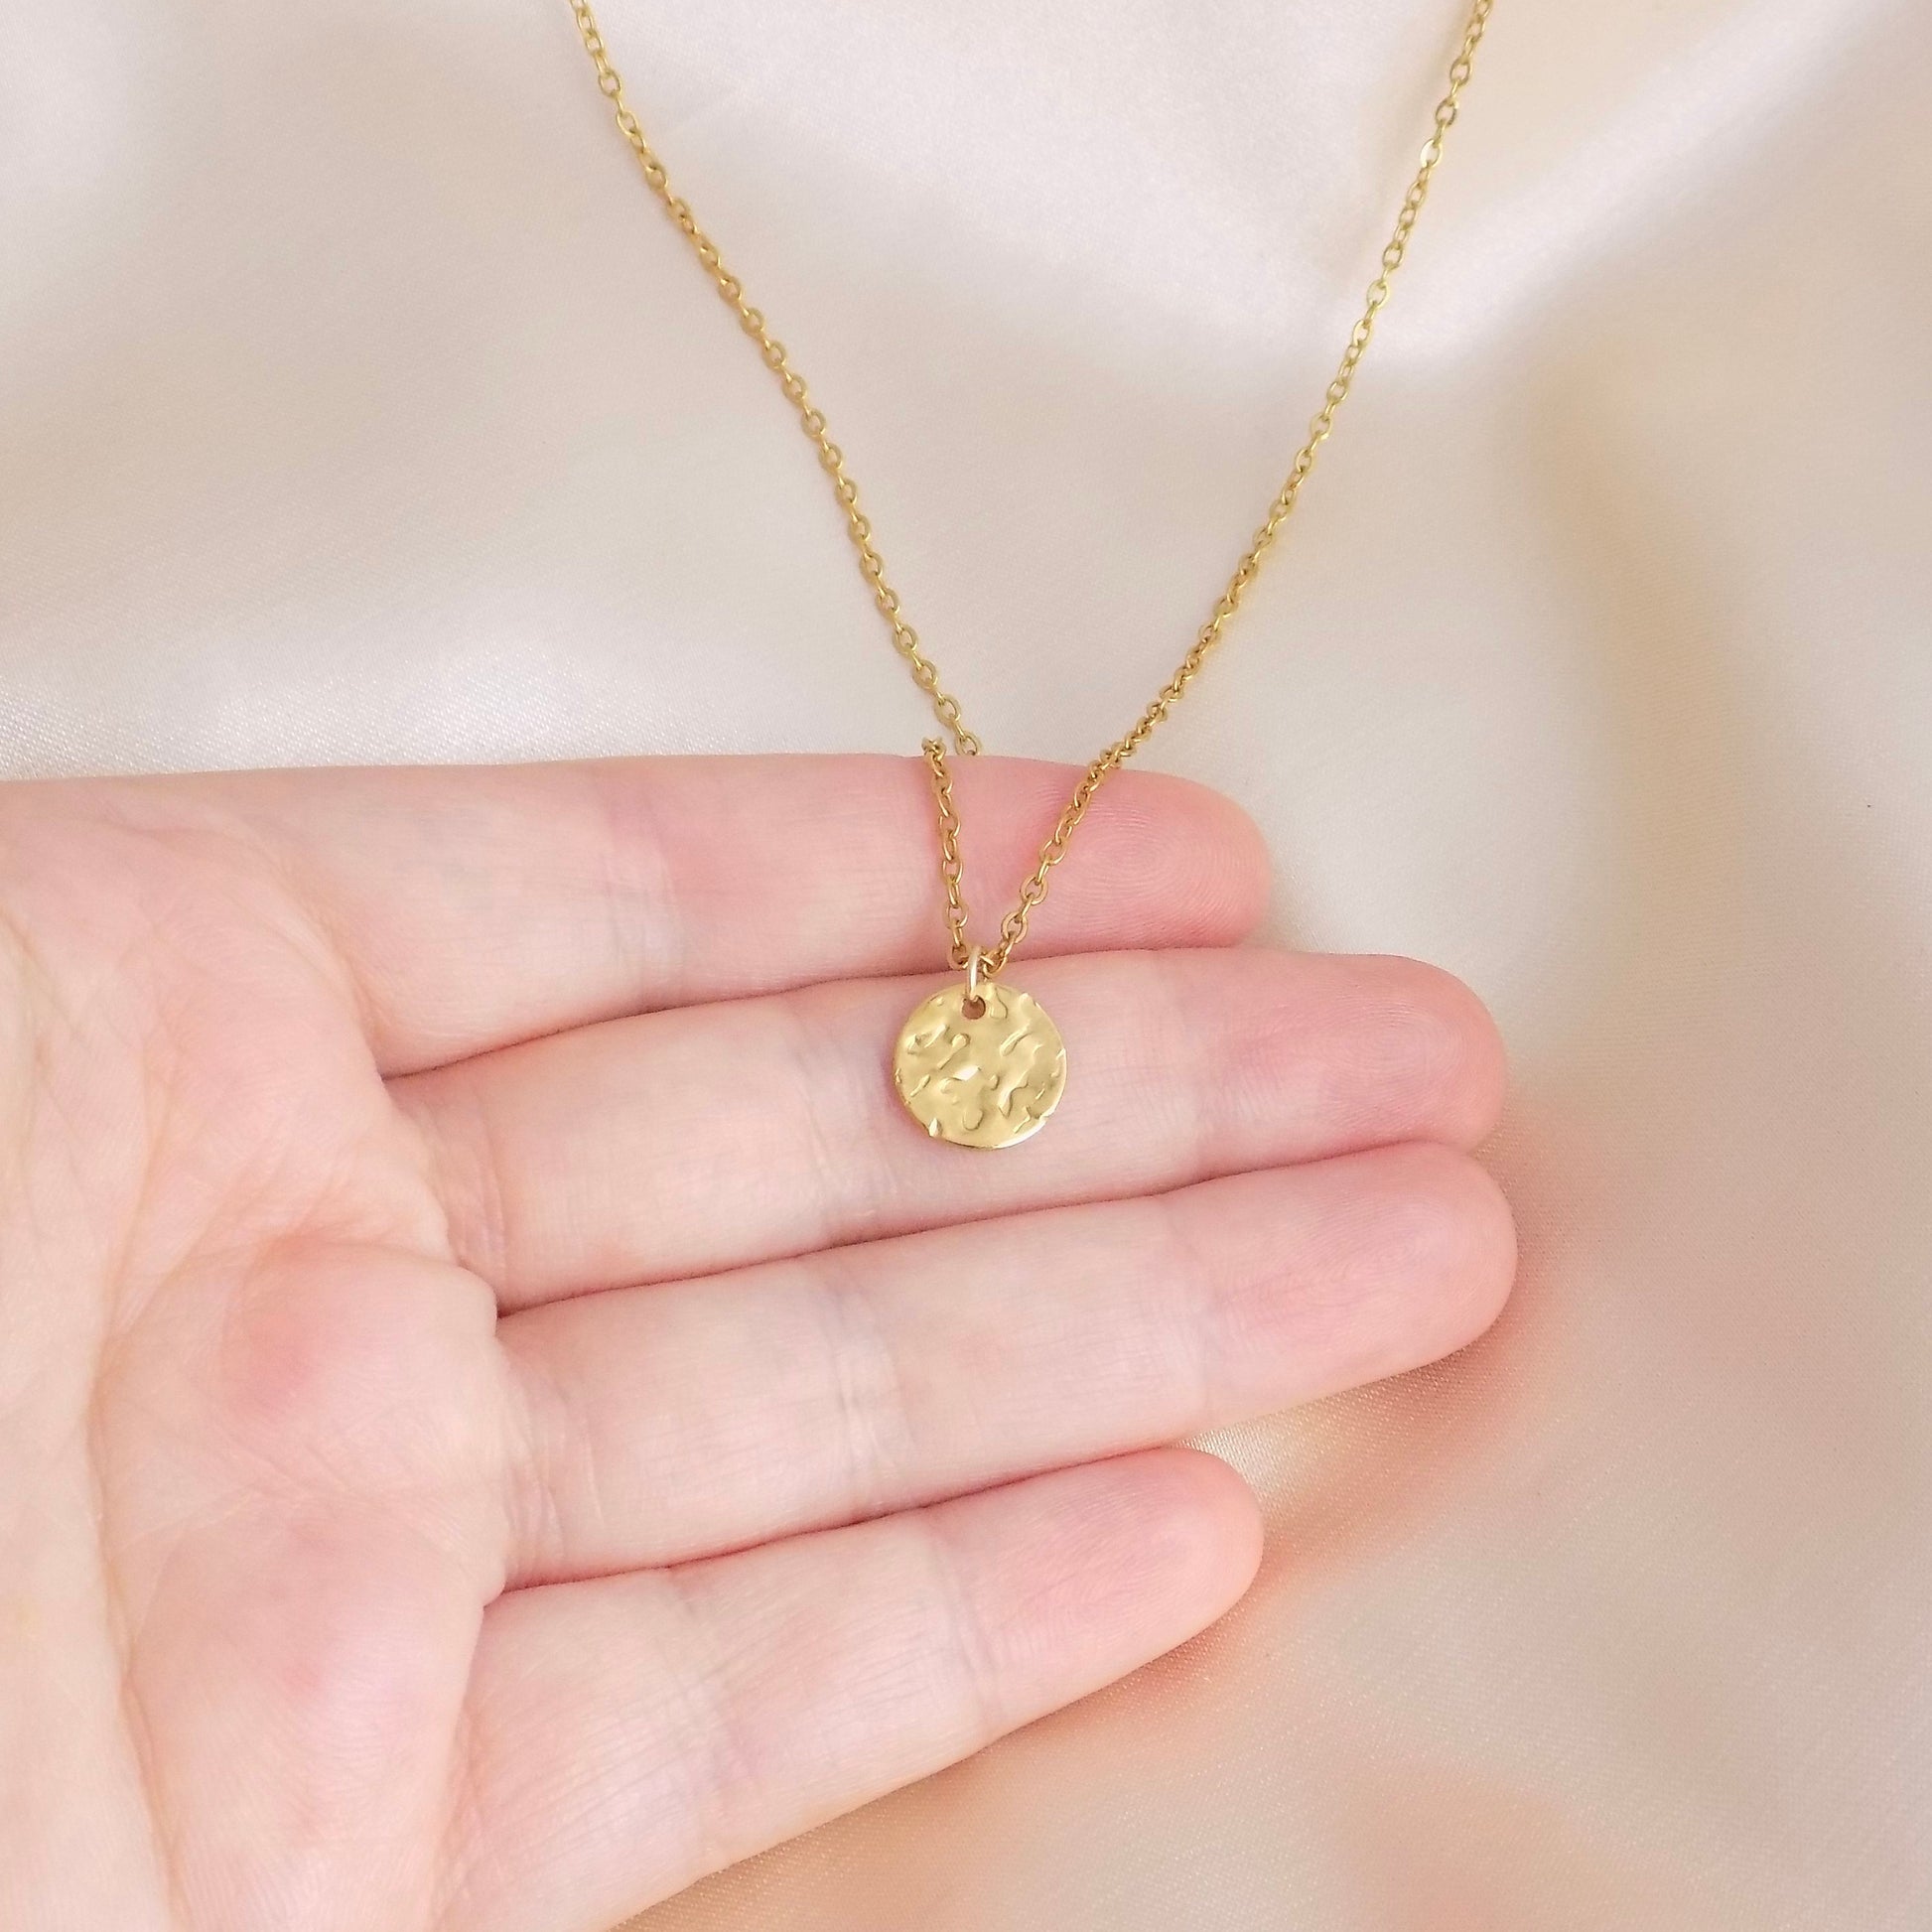 18K Gold Coin Necklace For Everyday Layering, Hammered Round Charm, Stainless Steel Jewelry